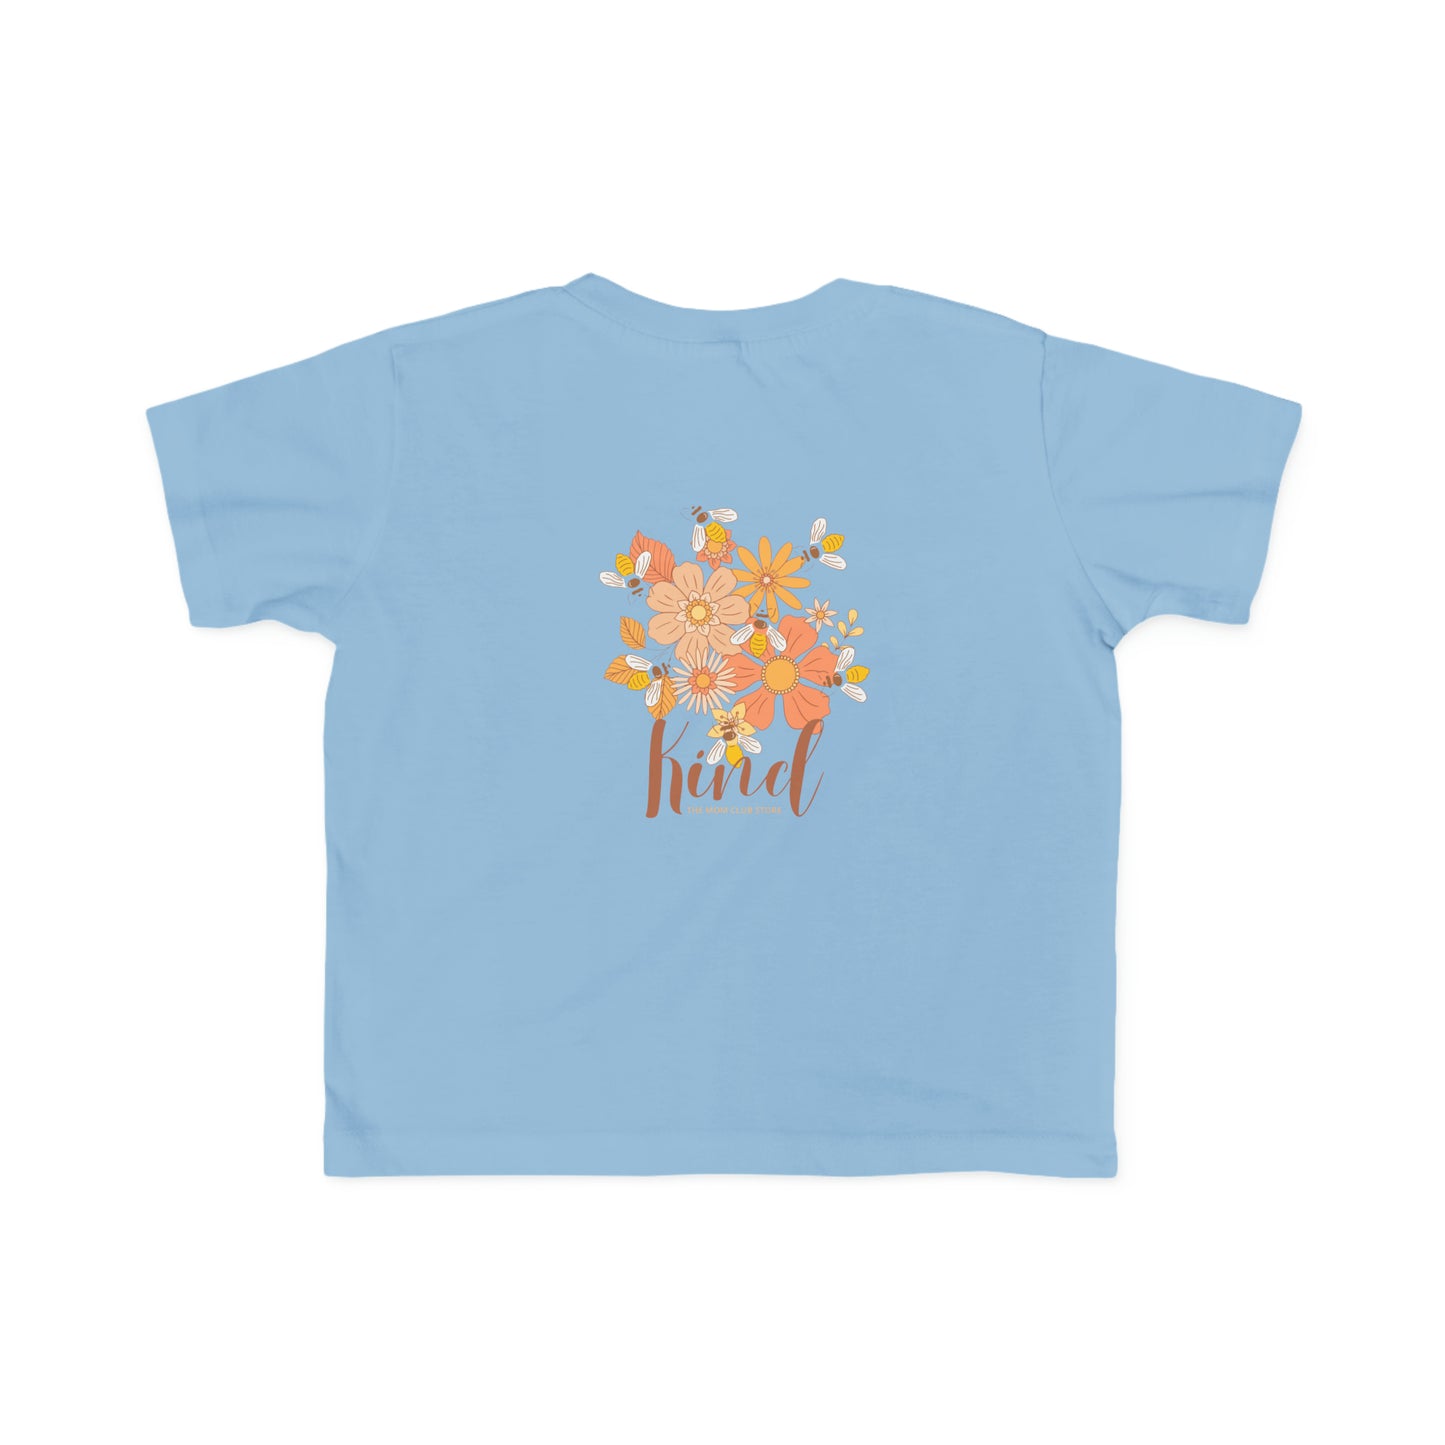 BEE KIND unisex print short-sleeve t-shirt for toddlers